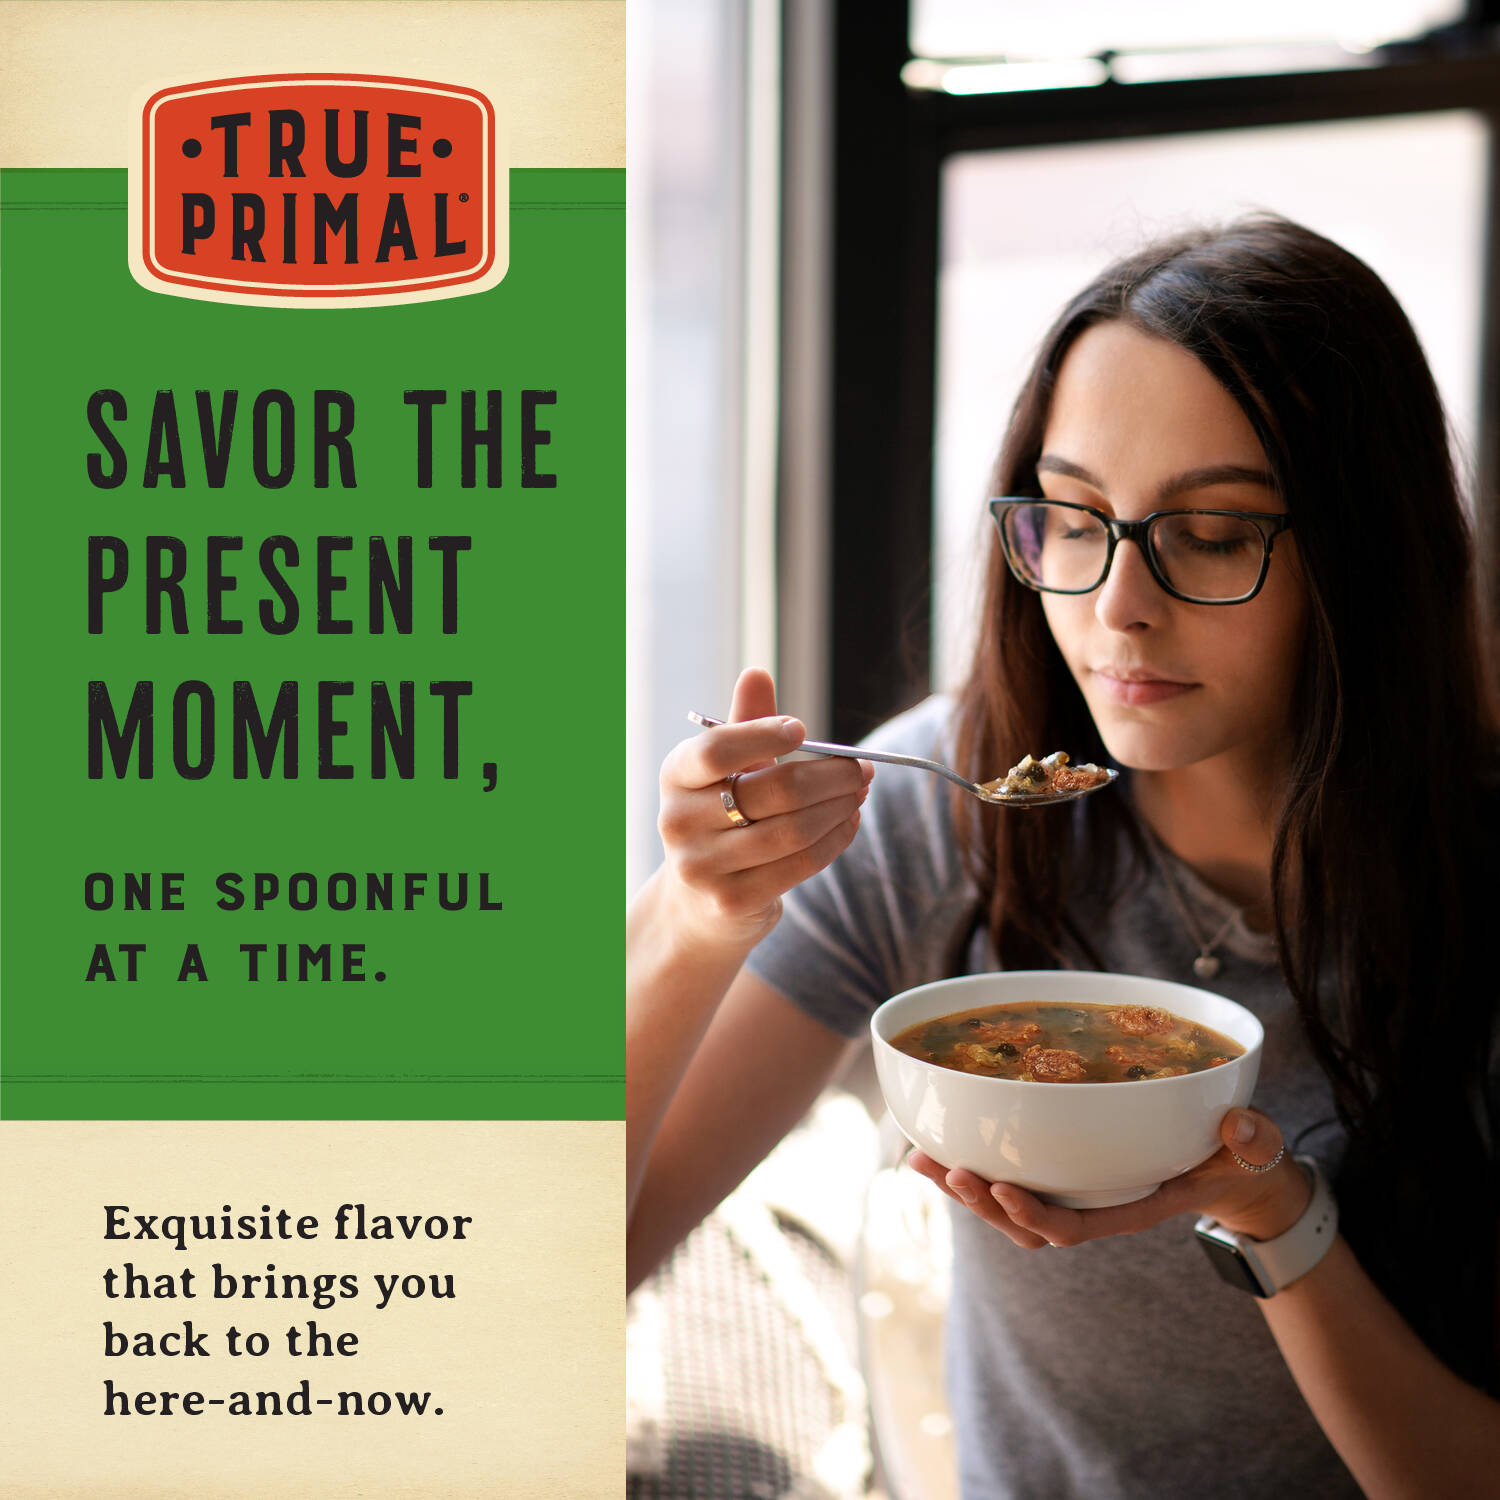 woman enjoying soup, with text: Savor the present moment, one spoonful at a time. Exquisite flavor that brings you back to the here-and-now